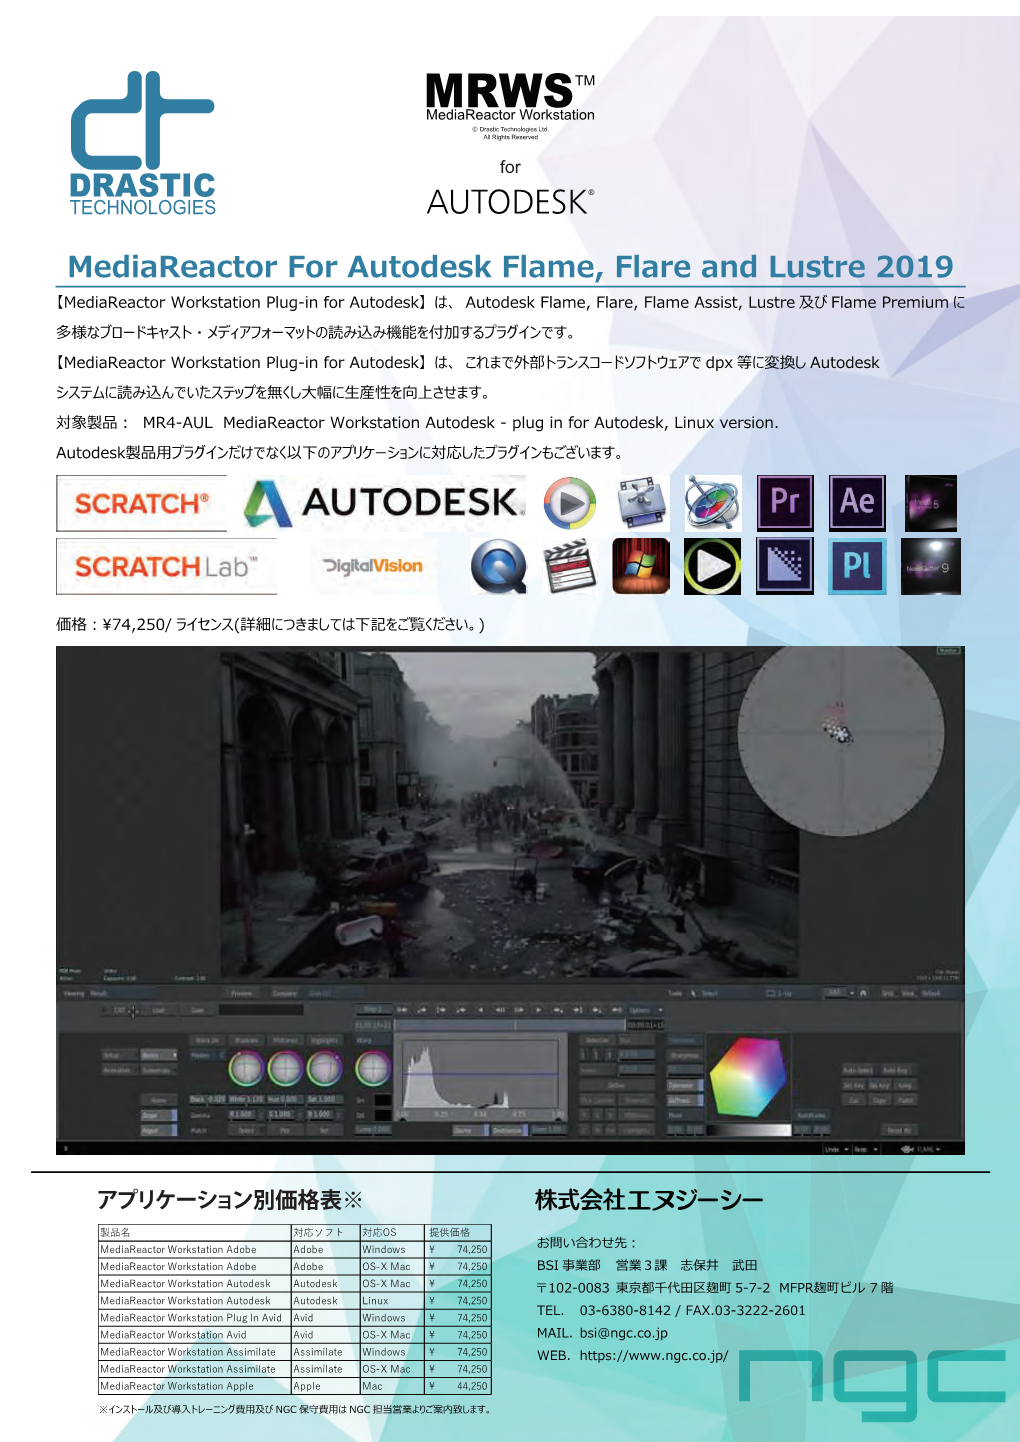 Mediareactor for Autodesk Flame, Flare and Lustre 2019